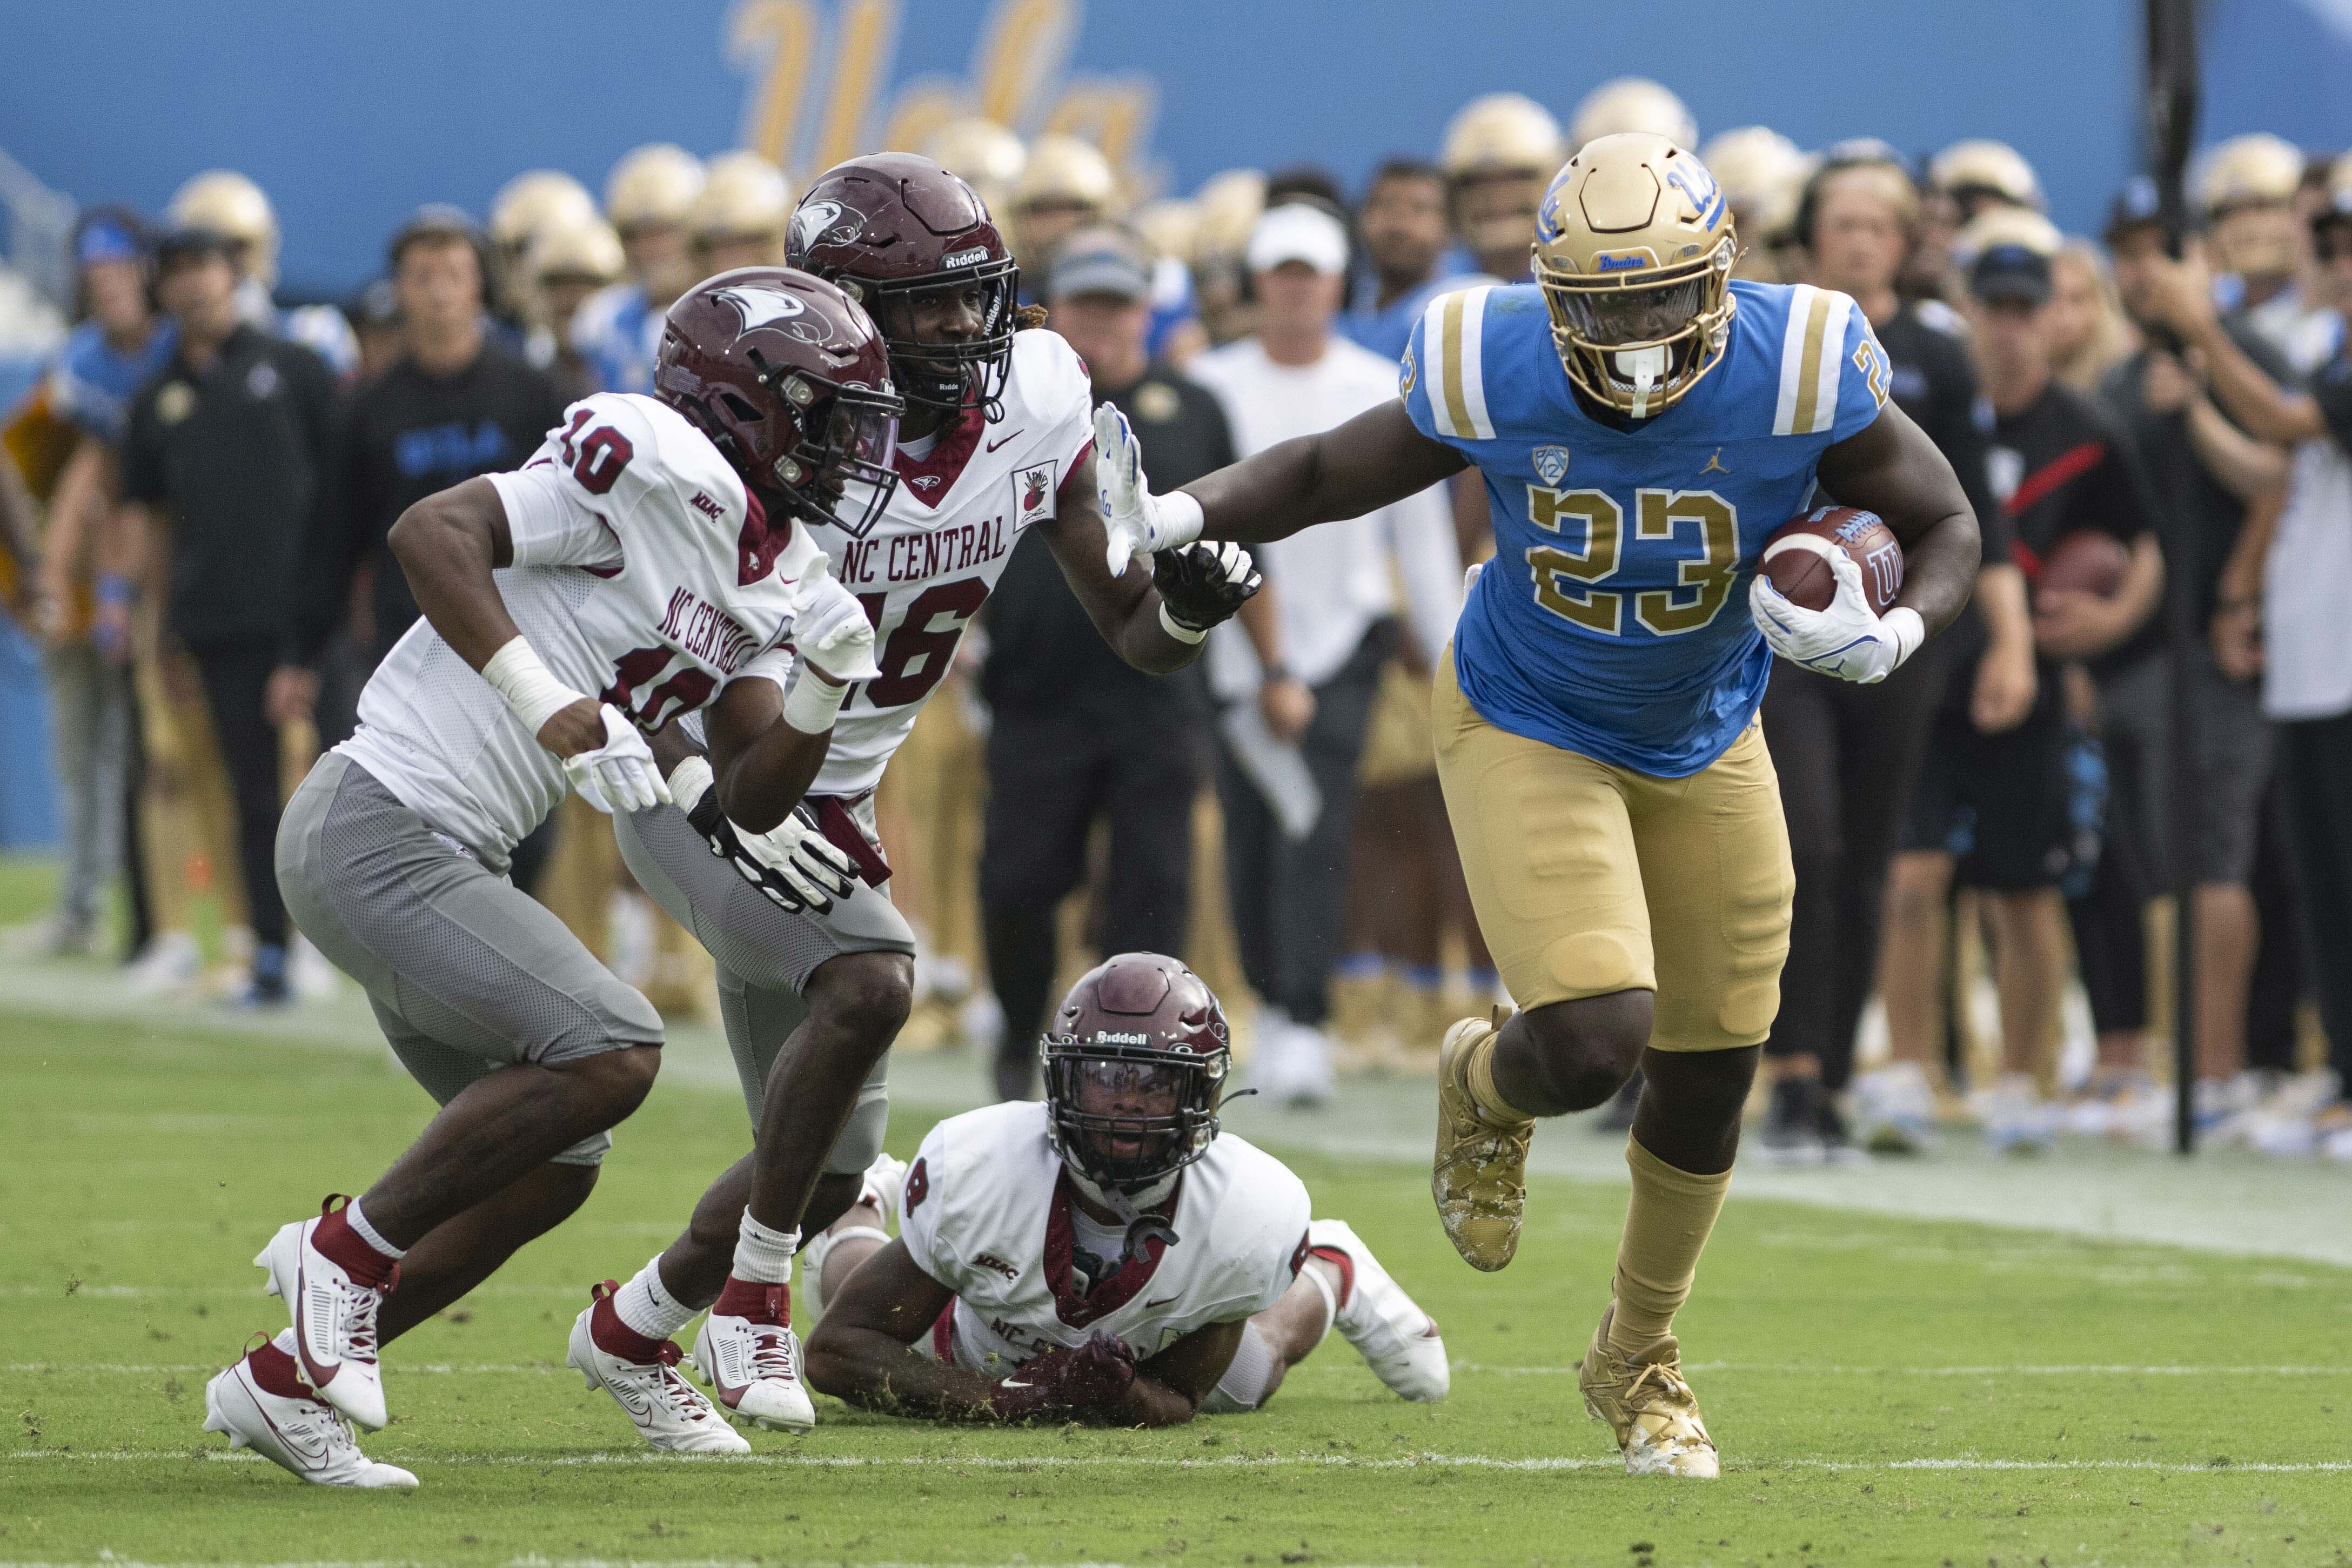 Redshirt junior running back Anthony Adkins sprints past three NC Central defenders. Adkins was UCLA football’s leading rusher on Saturday. (Brandon Morquecho/Assistant Photo editor)